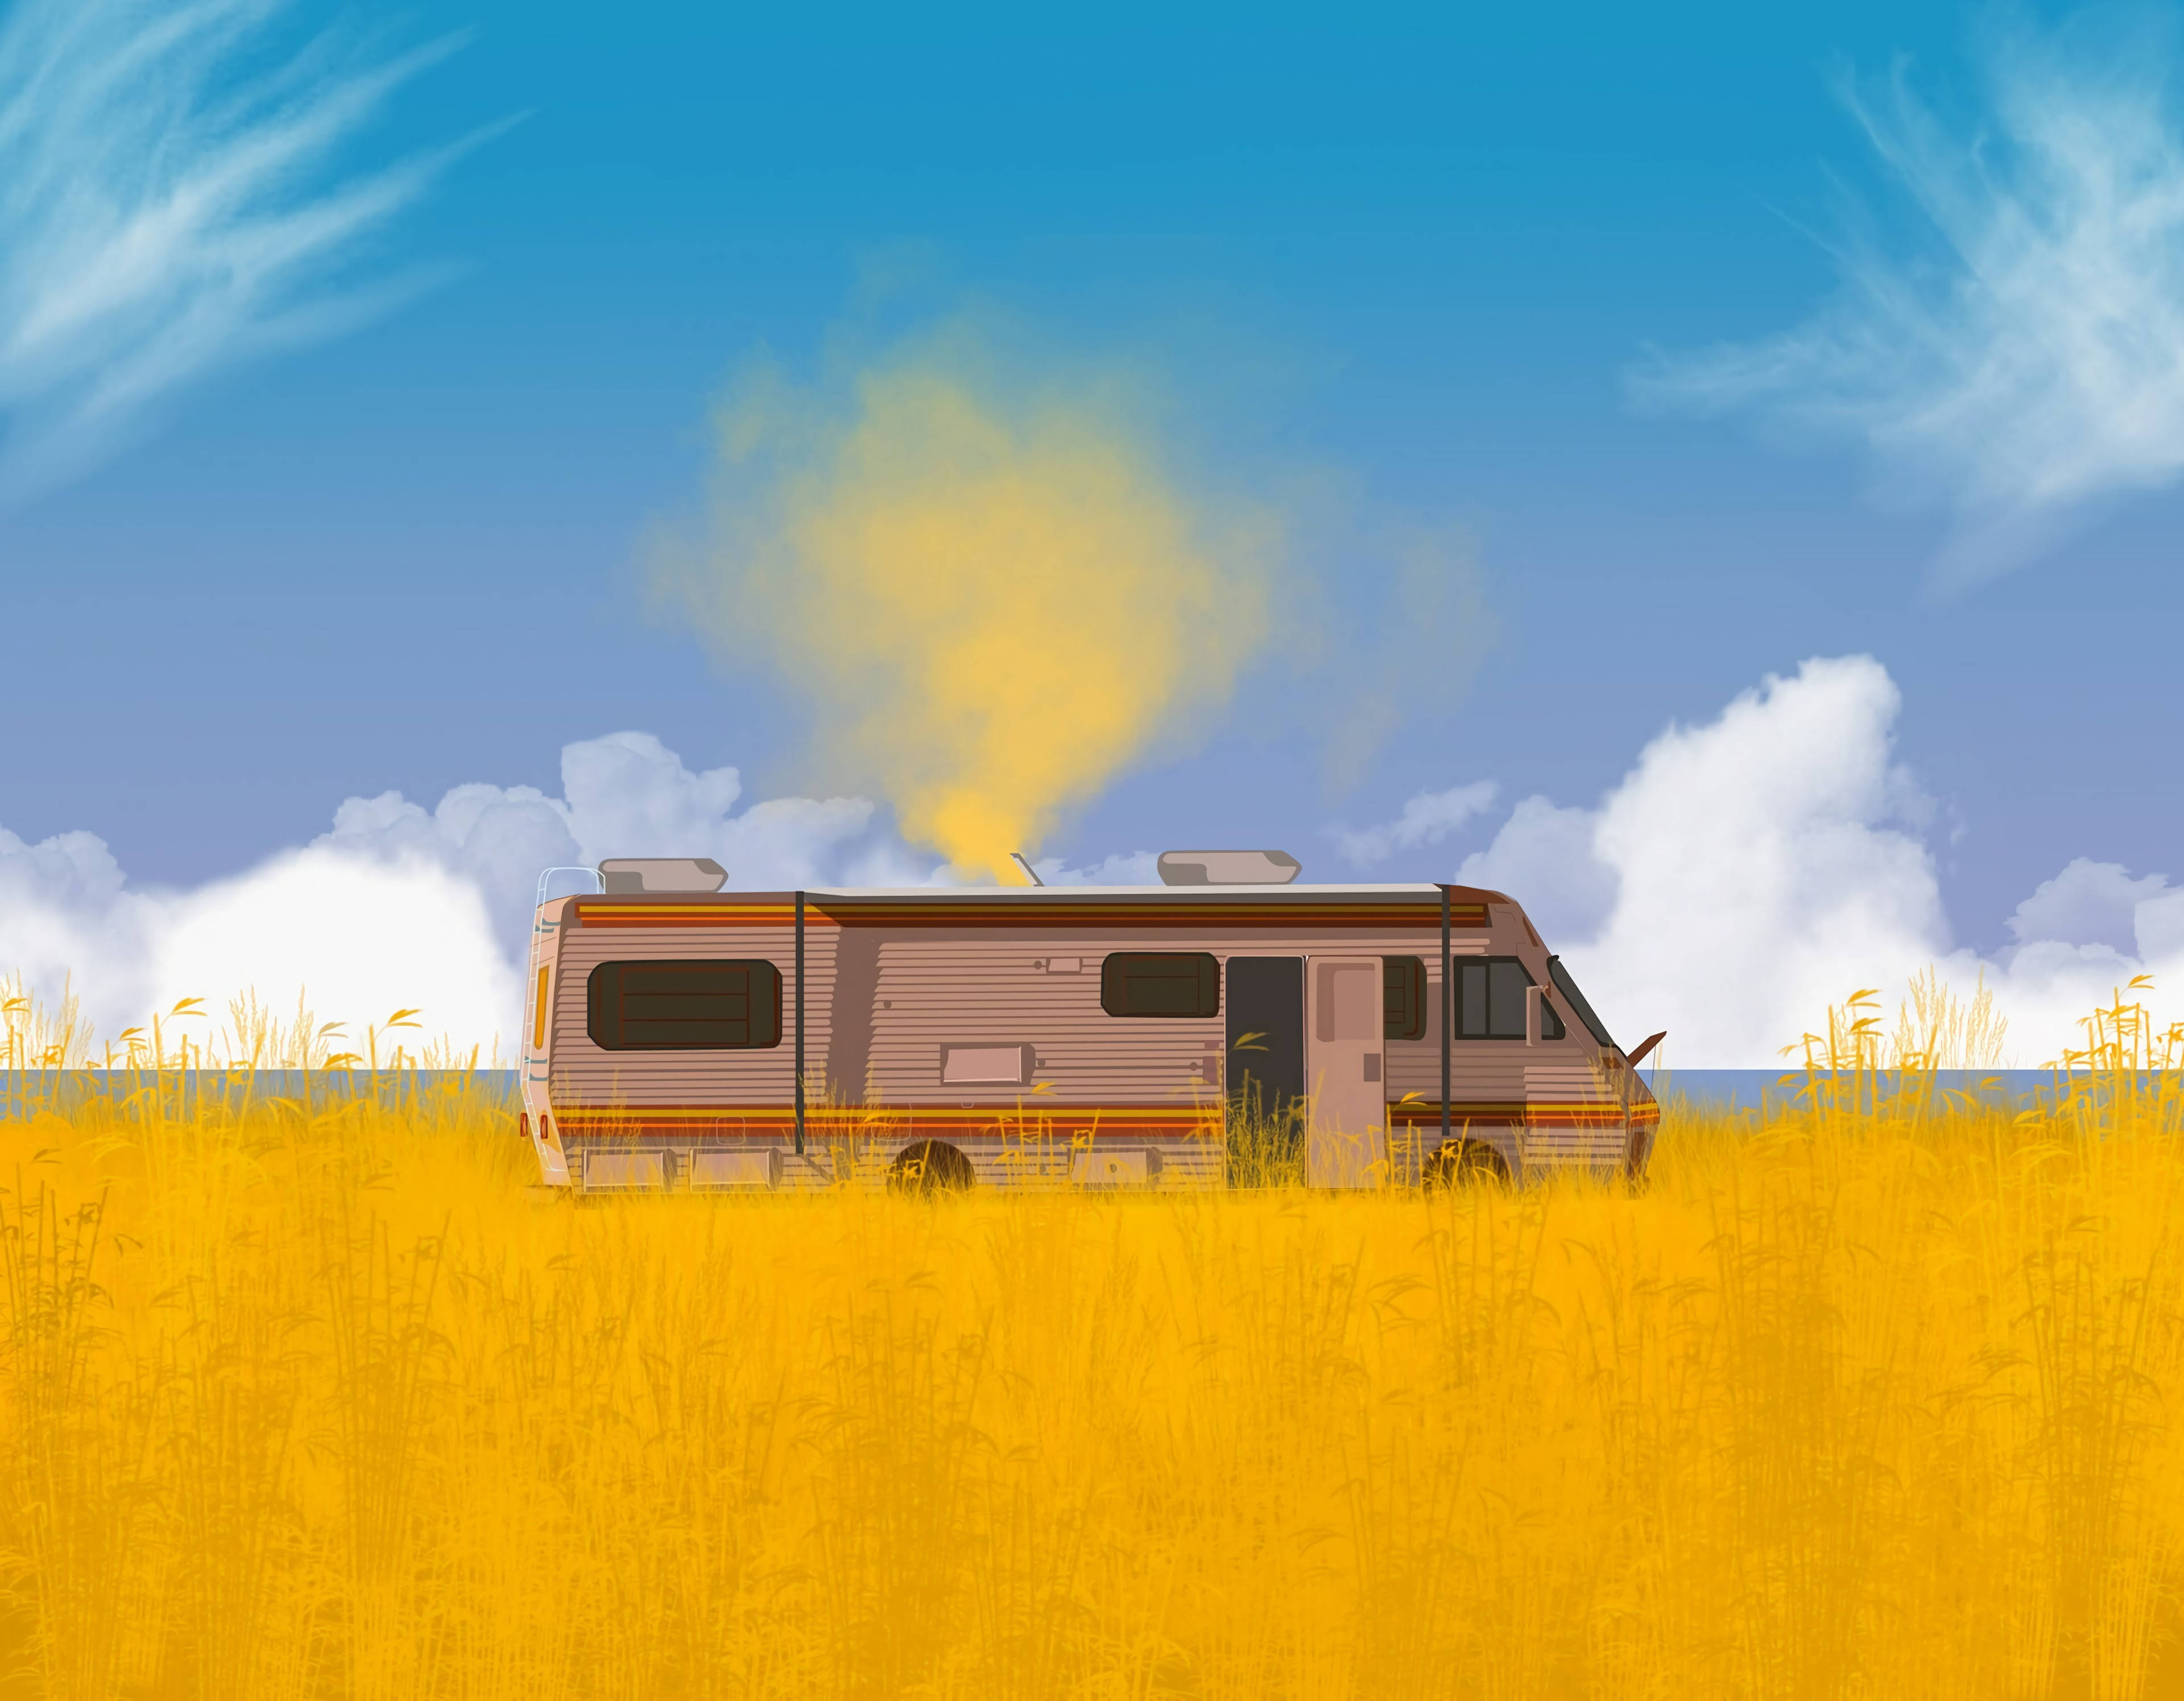 A Rv In A Field With Clouds Background